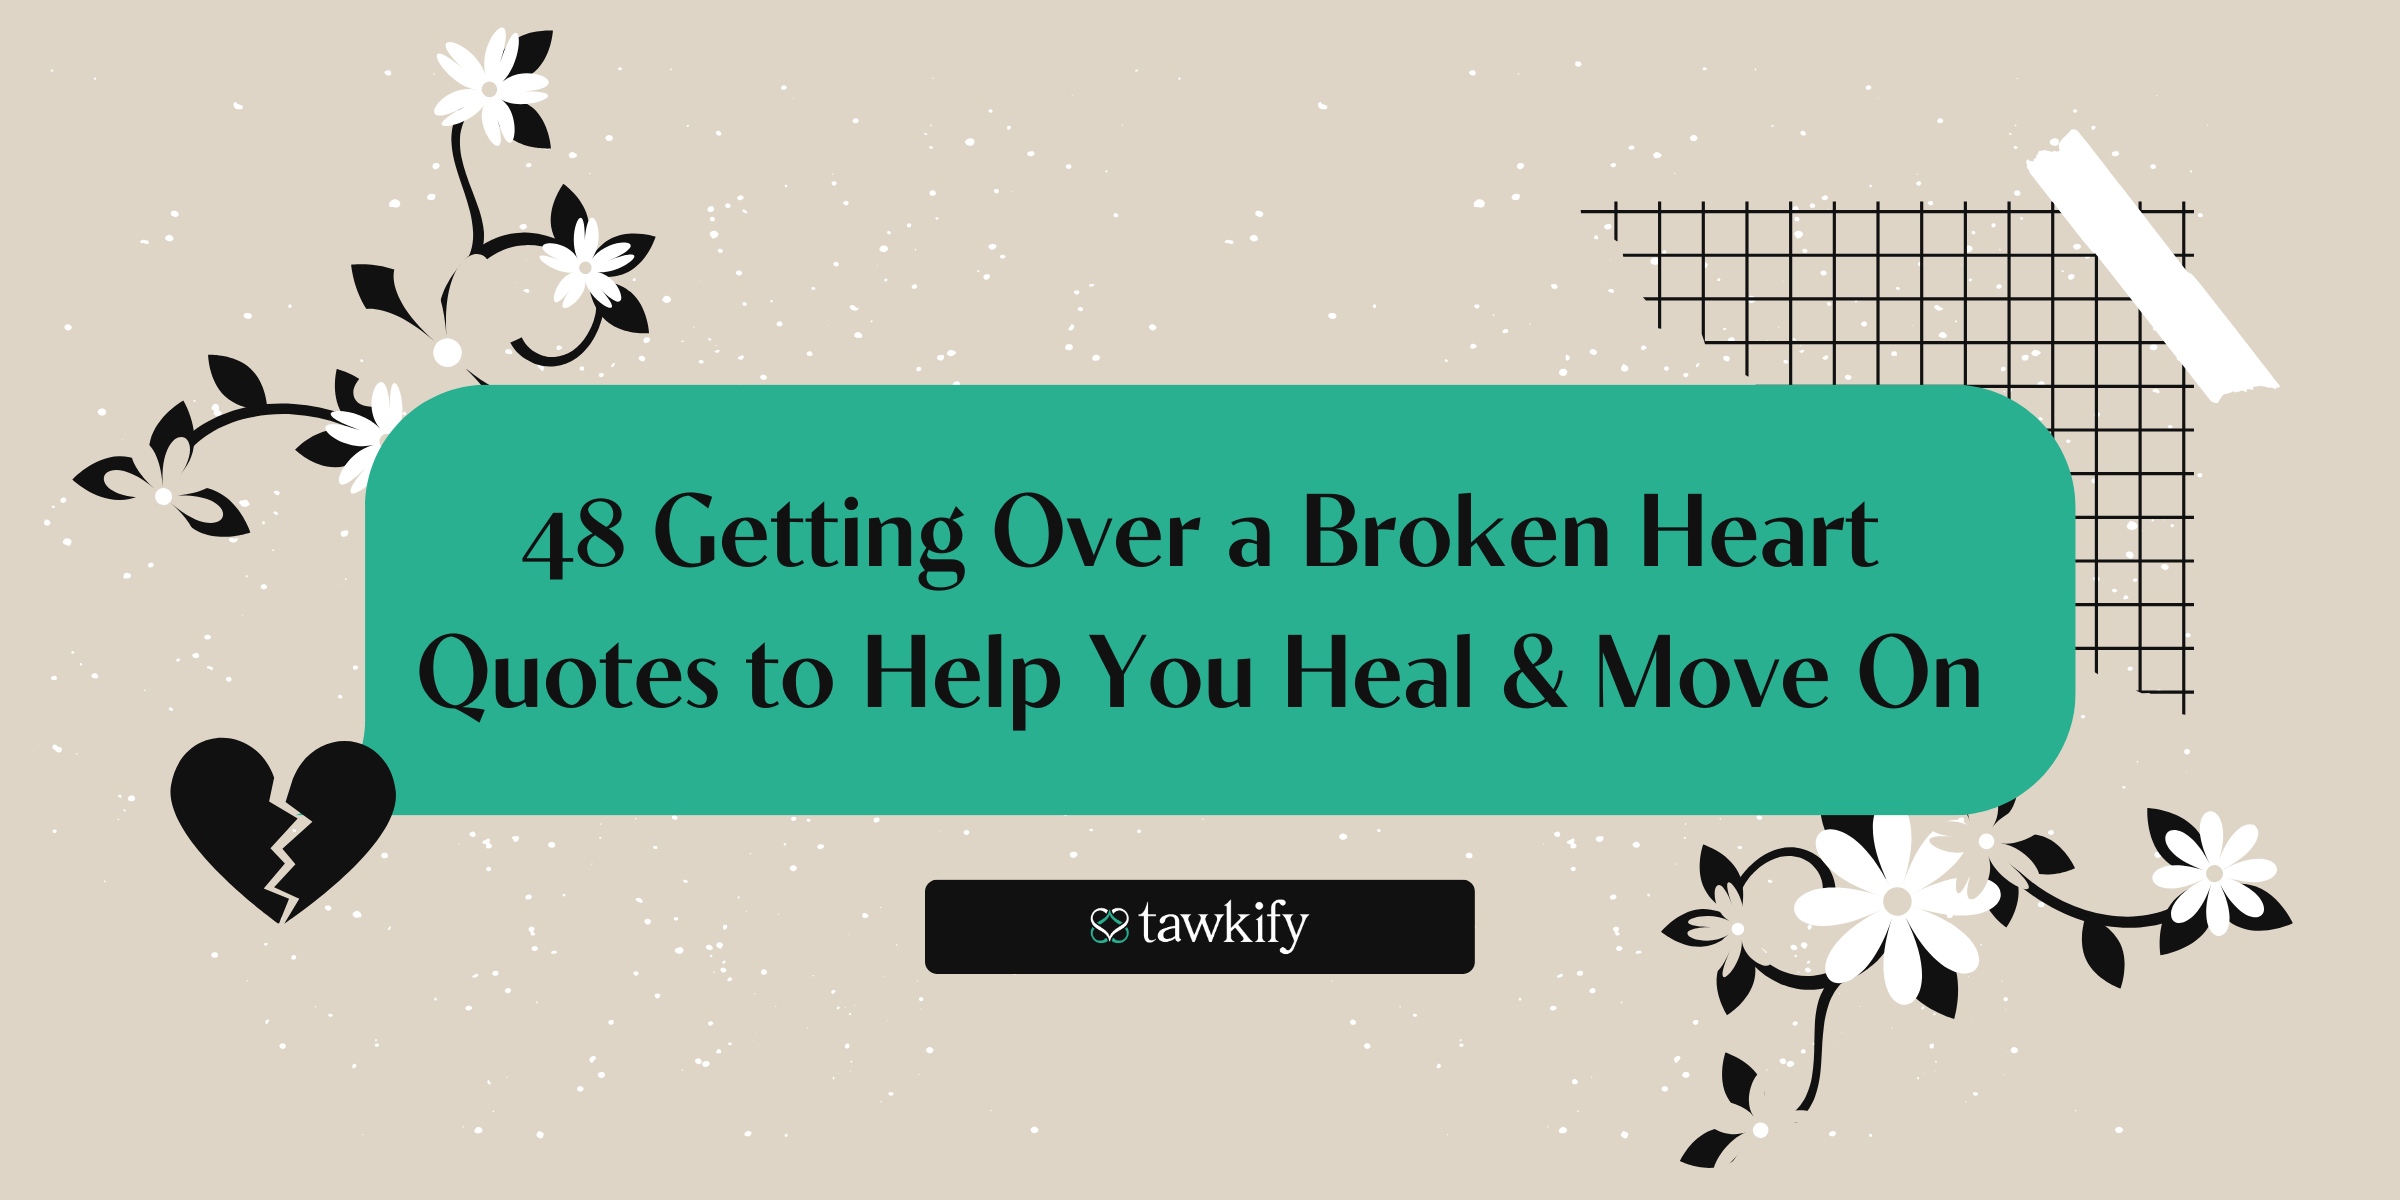 When it comes to mending your broken heart, reading some healing quotes can help. For inspiration, check out our guide to the best getting over a broken heart quotes.